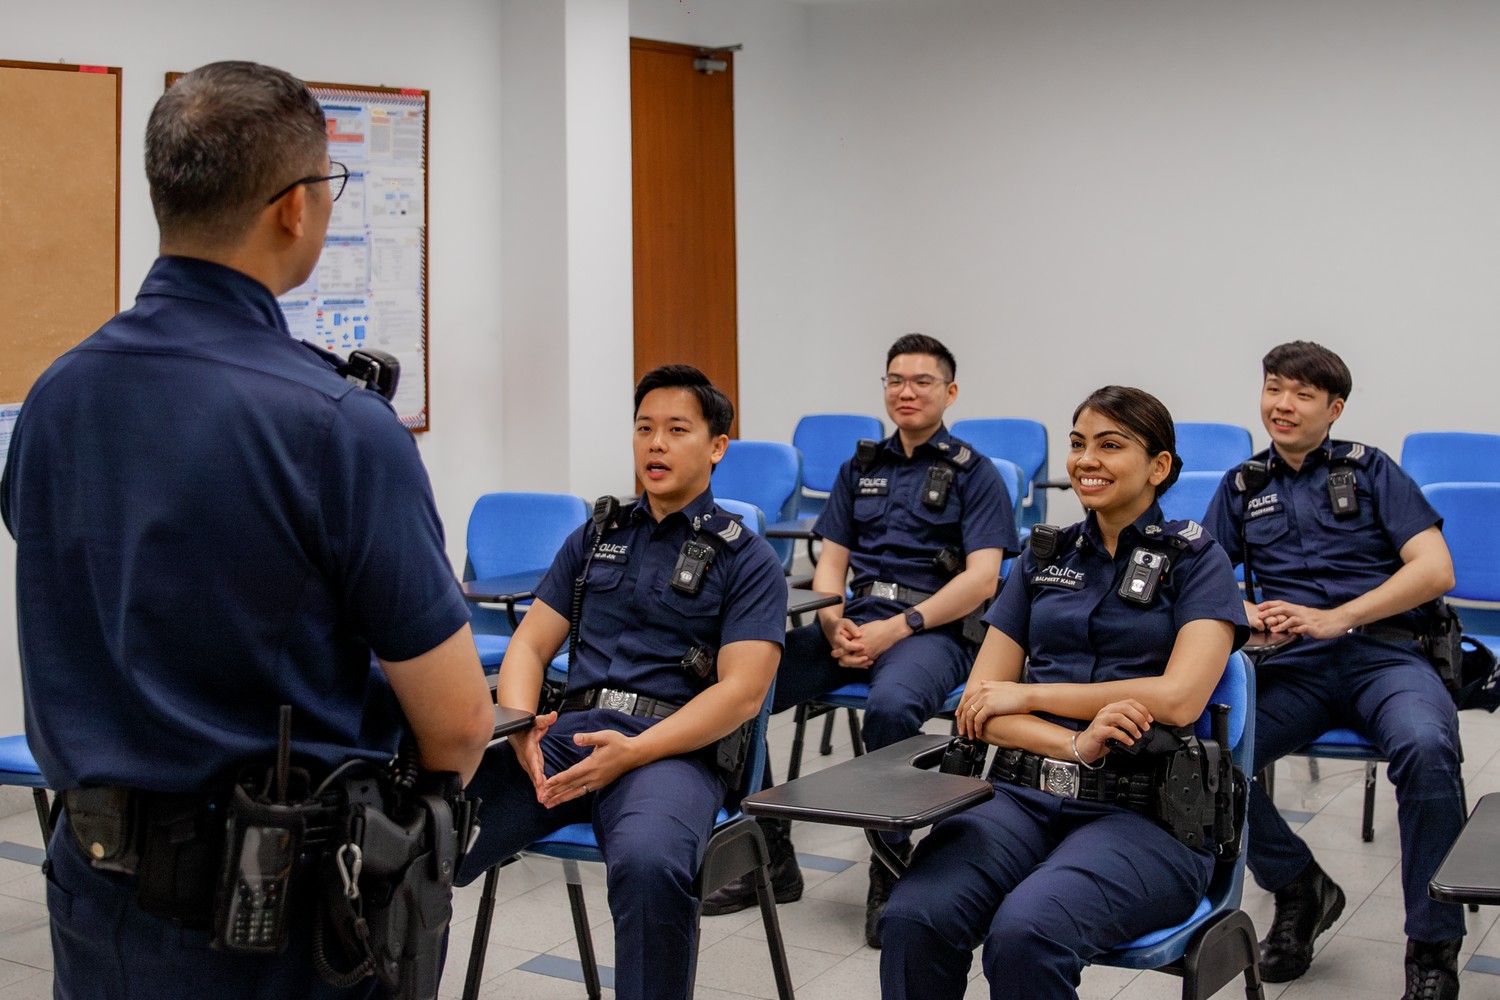 a male officer in uniform speaking in a briefing room, with many officers seated and facing him